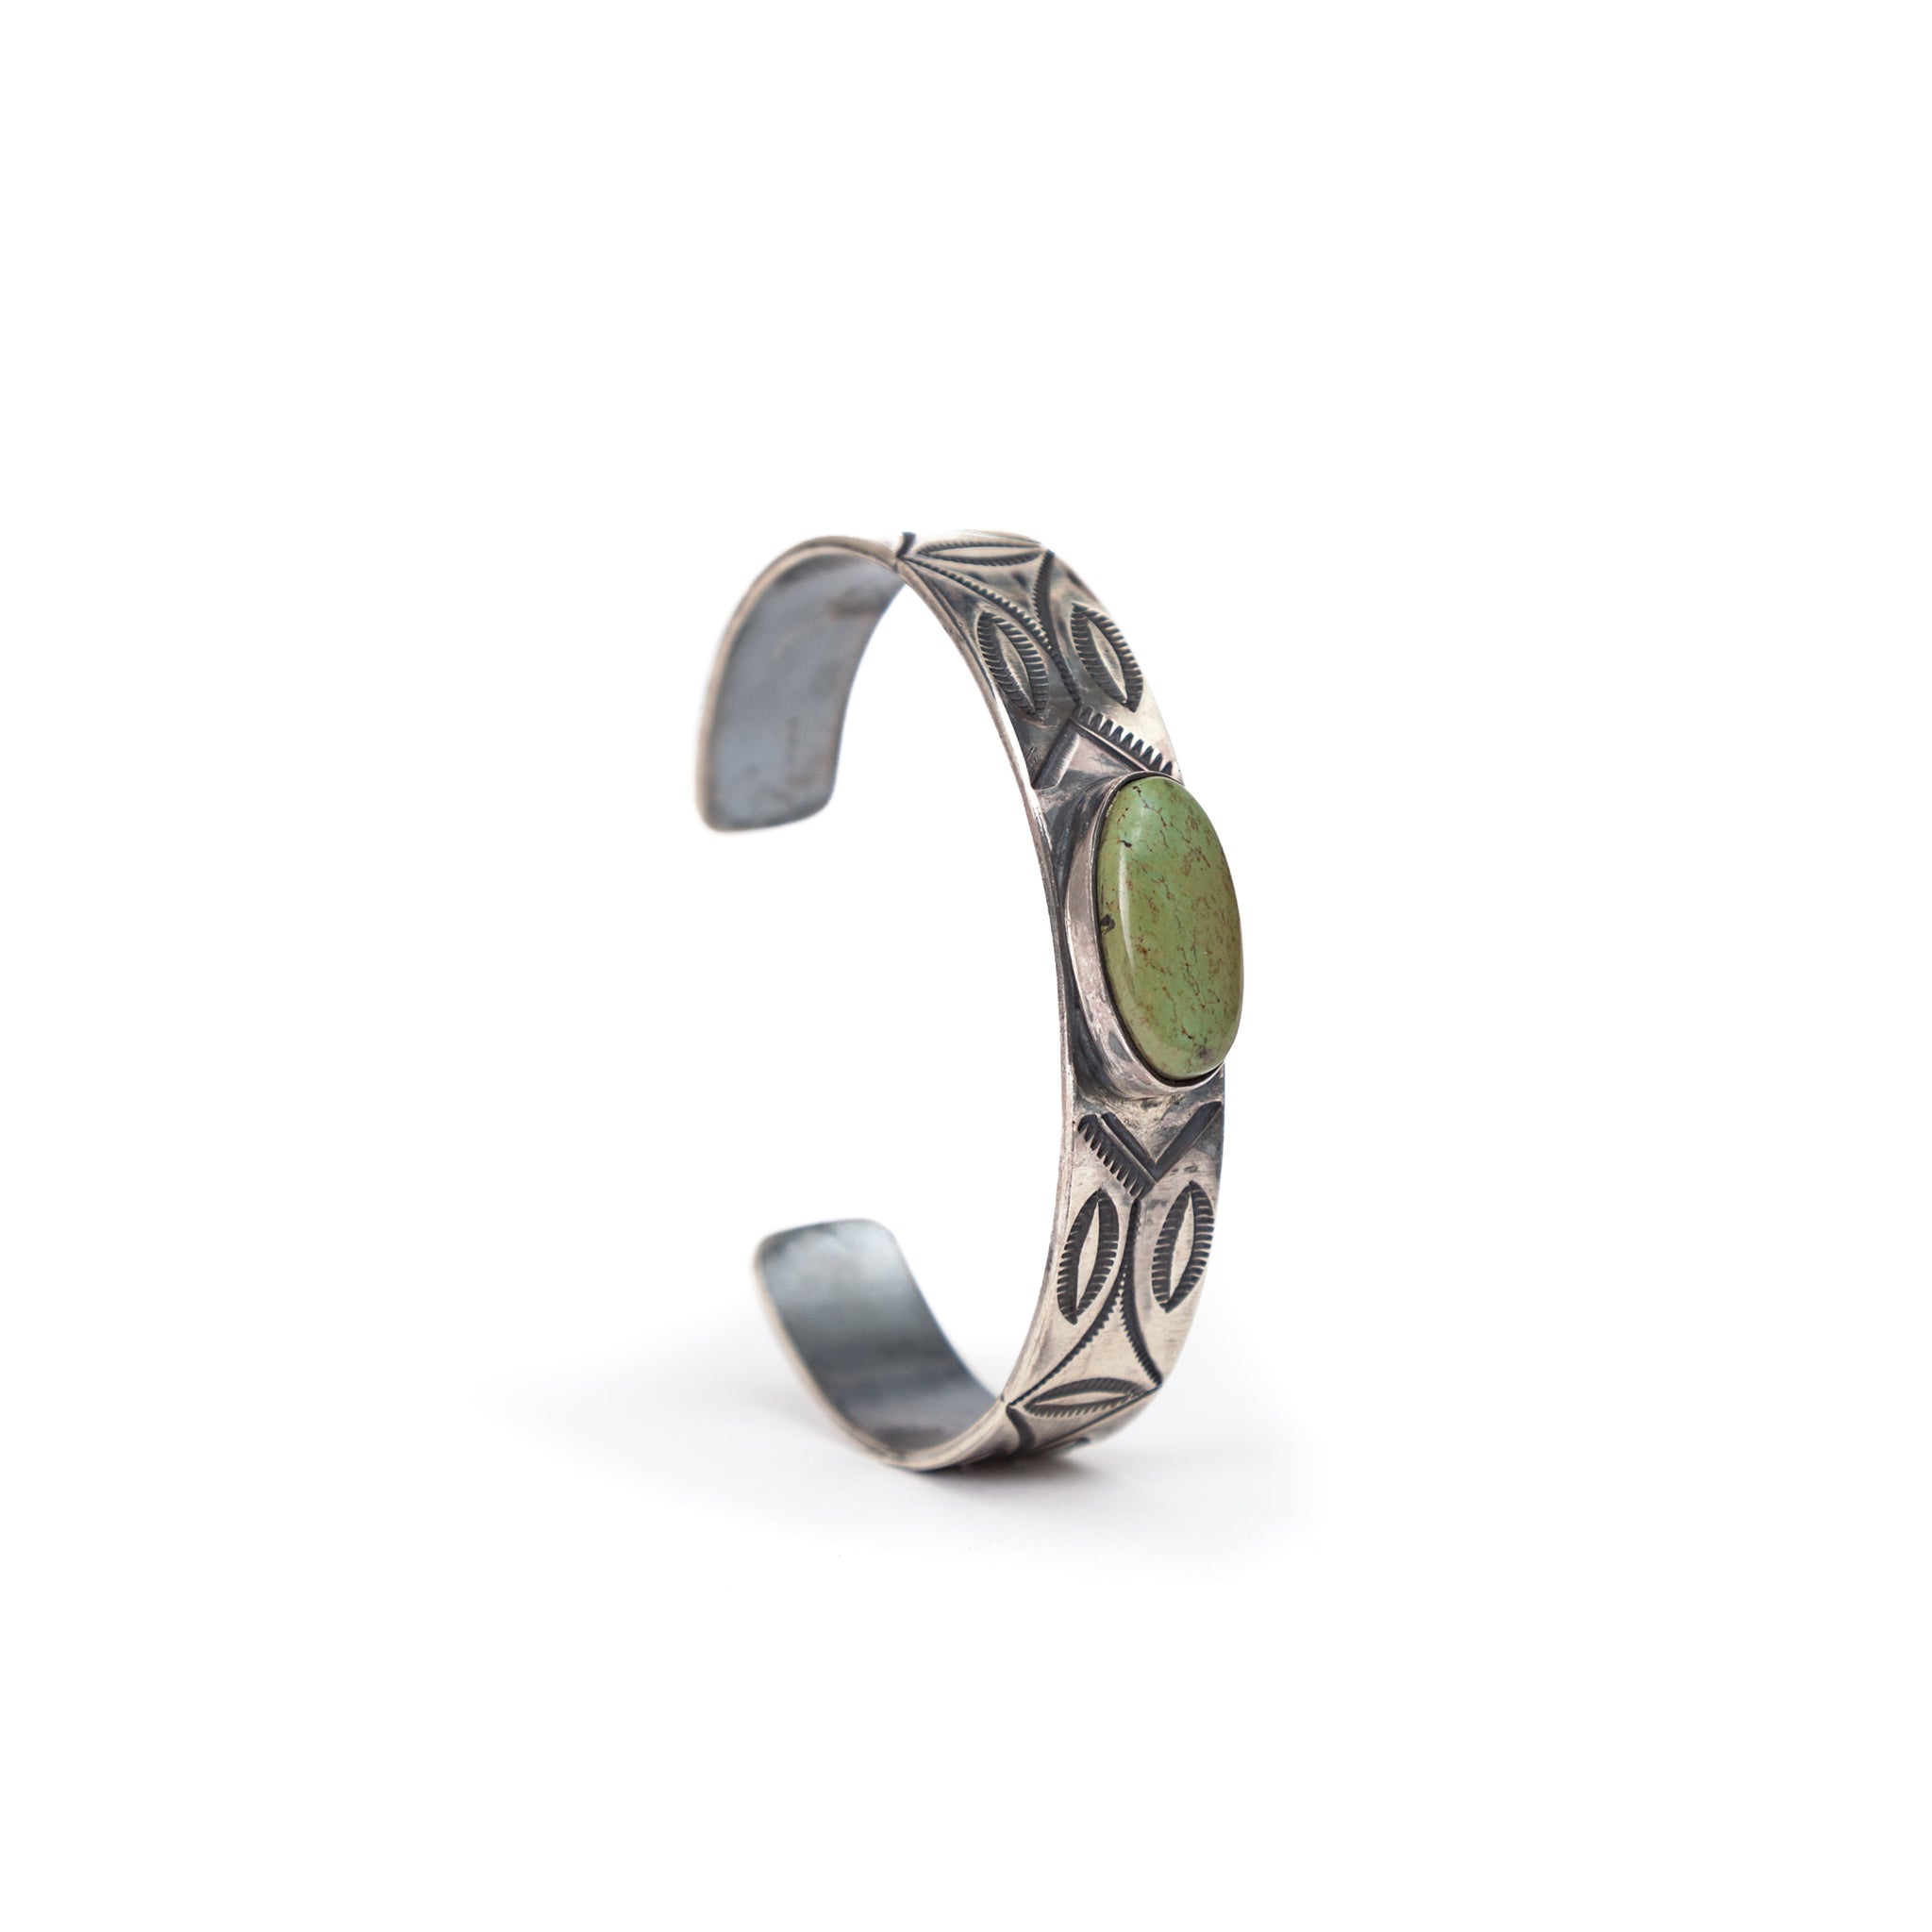 Silver Cuff & Turquoise Stone #5